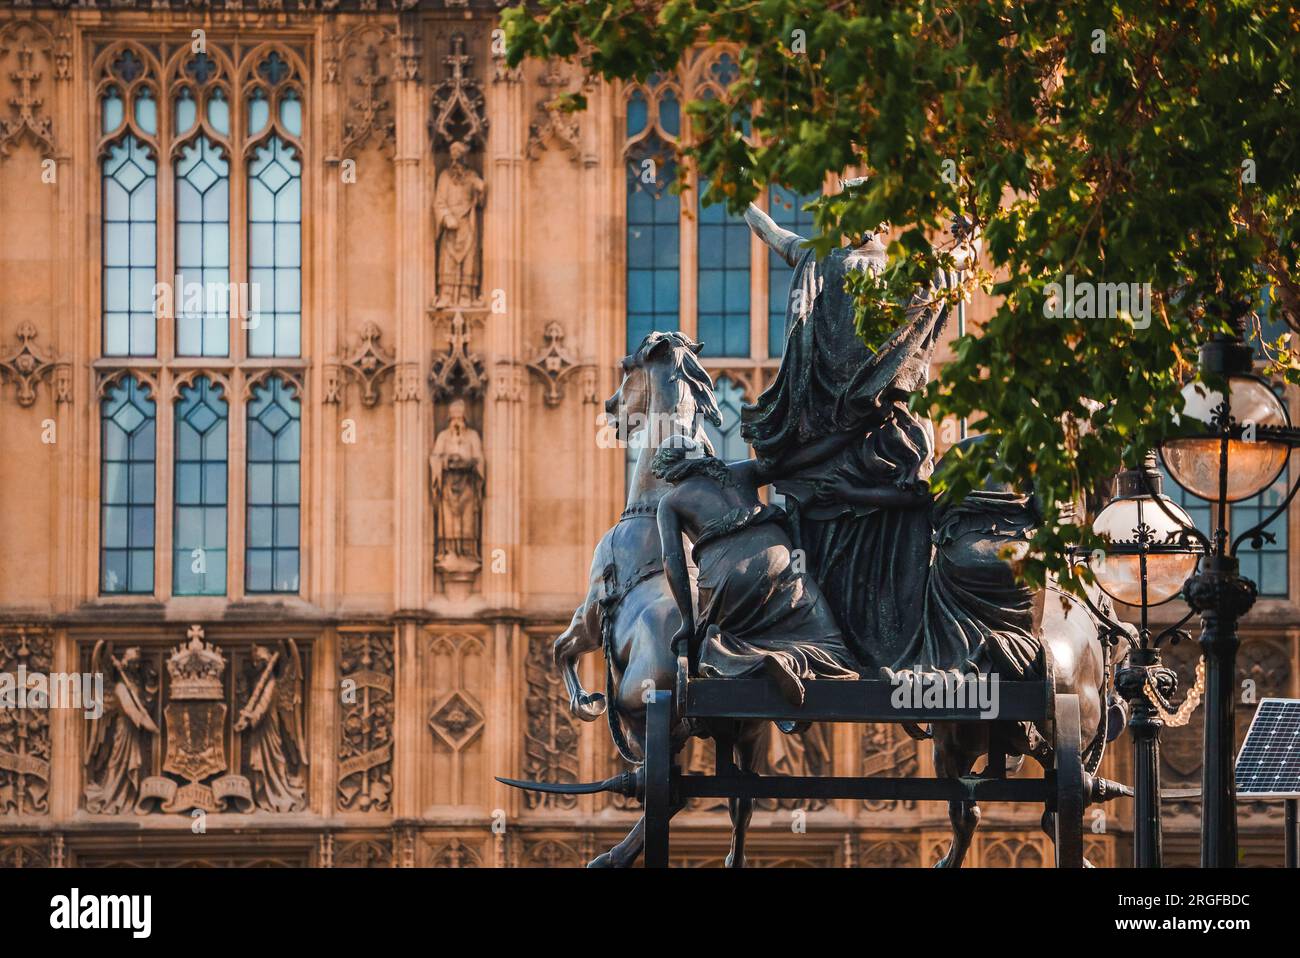 Statue des Boudiccan Rebellion und Westminster Palace in London Stockfoto